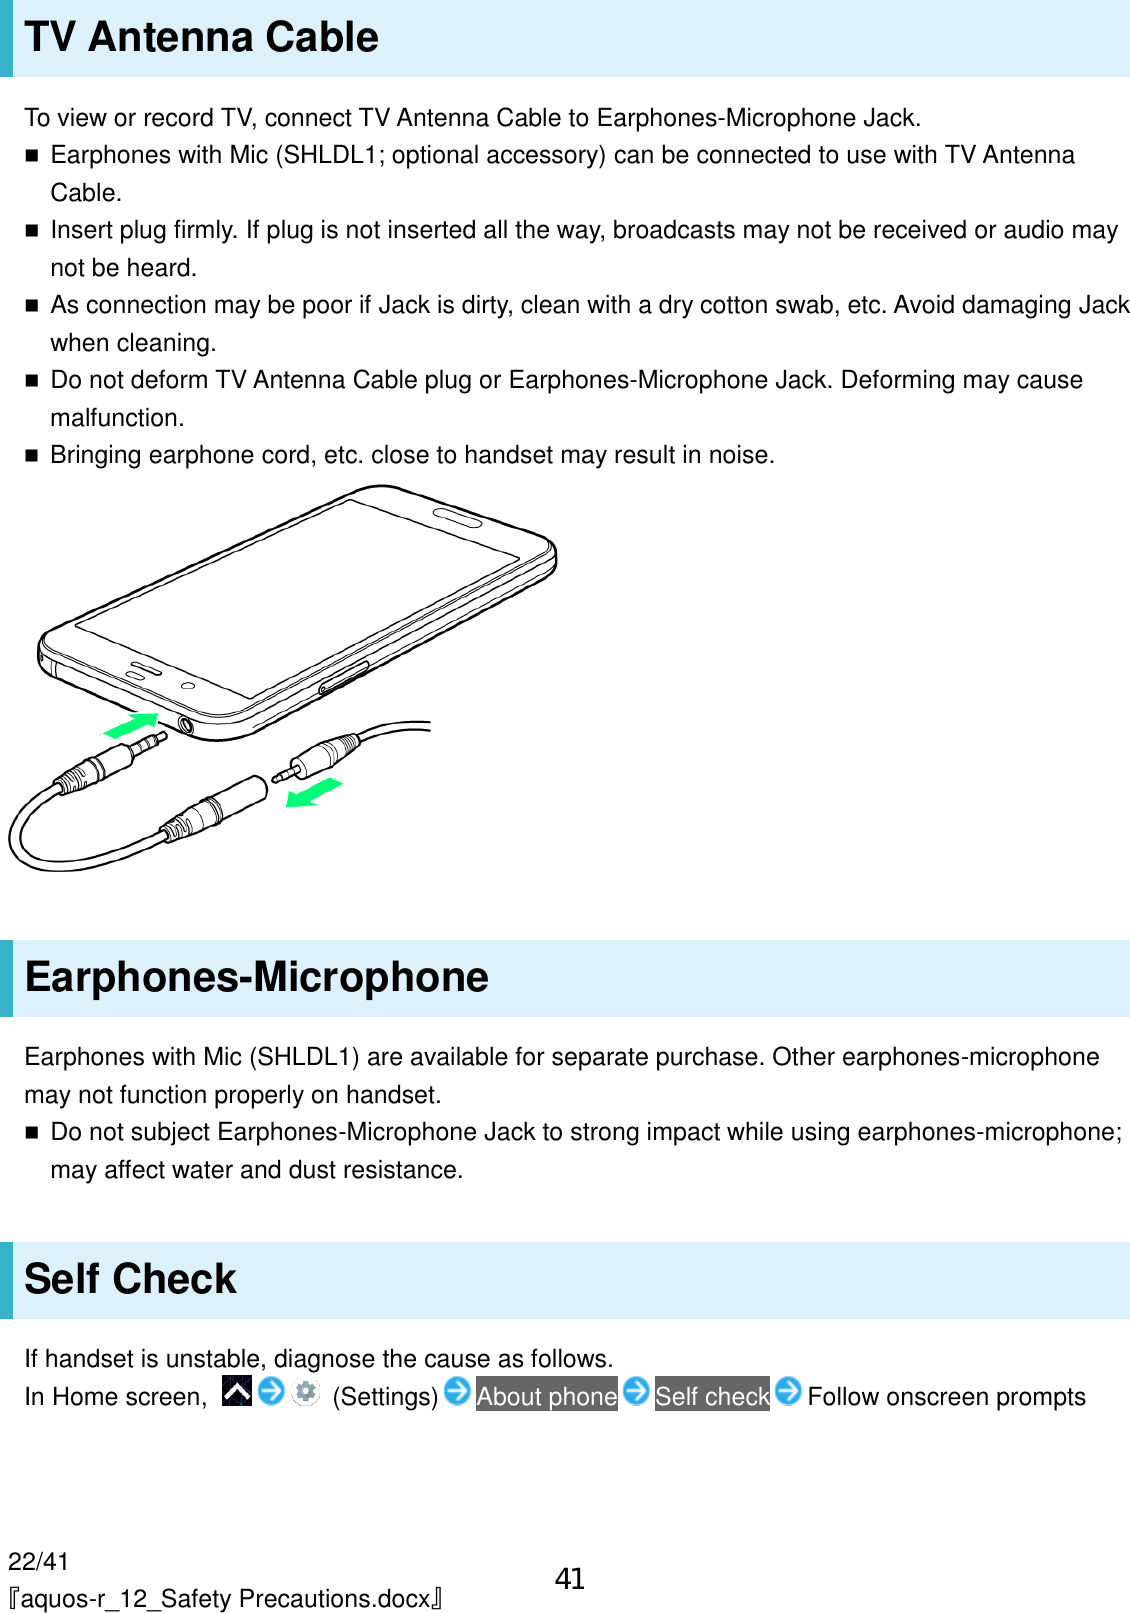 22/41 『aquos-r_12_Safety Precautions.docx』 TV Antenna Cable To view or record TV, connect TV Antenna Cable to Earphones-Microphone Jack.  Earphones with Mic (SHLDL1; optional accessory) can be connected to use with TV Antenna Cable.  Insert plug firmly. If plug is not inserted all the way, broadcasts may not be received or audio may not be heard.  As connection may be poor if Jack is dirty, clean with a dry cotton swab, etc. Avoid damaging Jack when cleaning.  Do not deform TV Antenna Cable plug or Earphones-Microphone Jack. Deforming may cause malfunction.  Bringing earphone cord, etc. close to handset may result in noise.  Earphones-Microphone Earphones with Mic (SHLDL1) are available for separate purchase. Other earphones-microphone may not function properly on handset.  Do not subject Earphones-Microphone Jack to strong impact while using earphones-microphone; may affect water and dust resistance. Self Check If handset is unstable, diagnose the cause as follows. In Home screen,    (Settings) About phone Self check Follow onscreen prompts 41